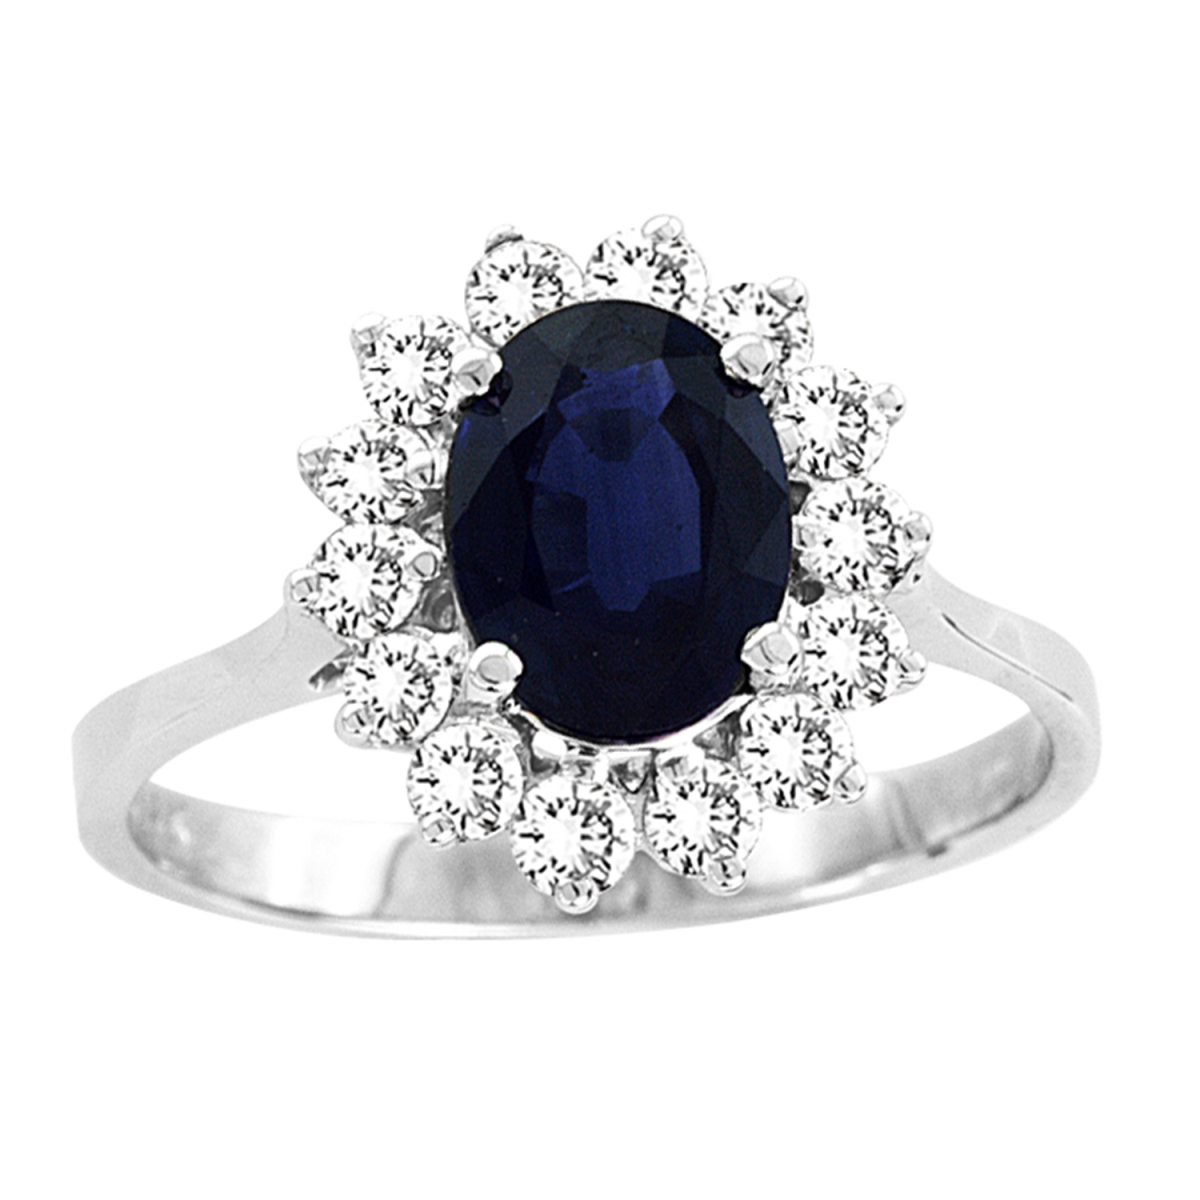 Picture of Louis Creations R1548SD-8 14K Gold Royal Collection 1.75 CTTW 8 x 6 mm 1.35 Carat Oval Sapphire Center Stone Natural Sapphire & Diamond Ring - Size 8